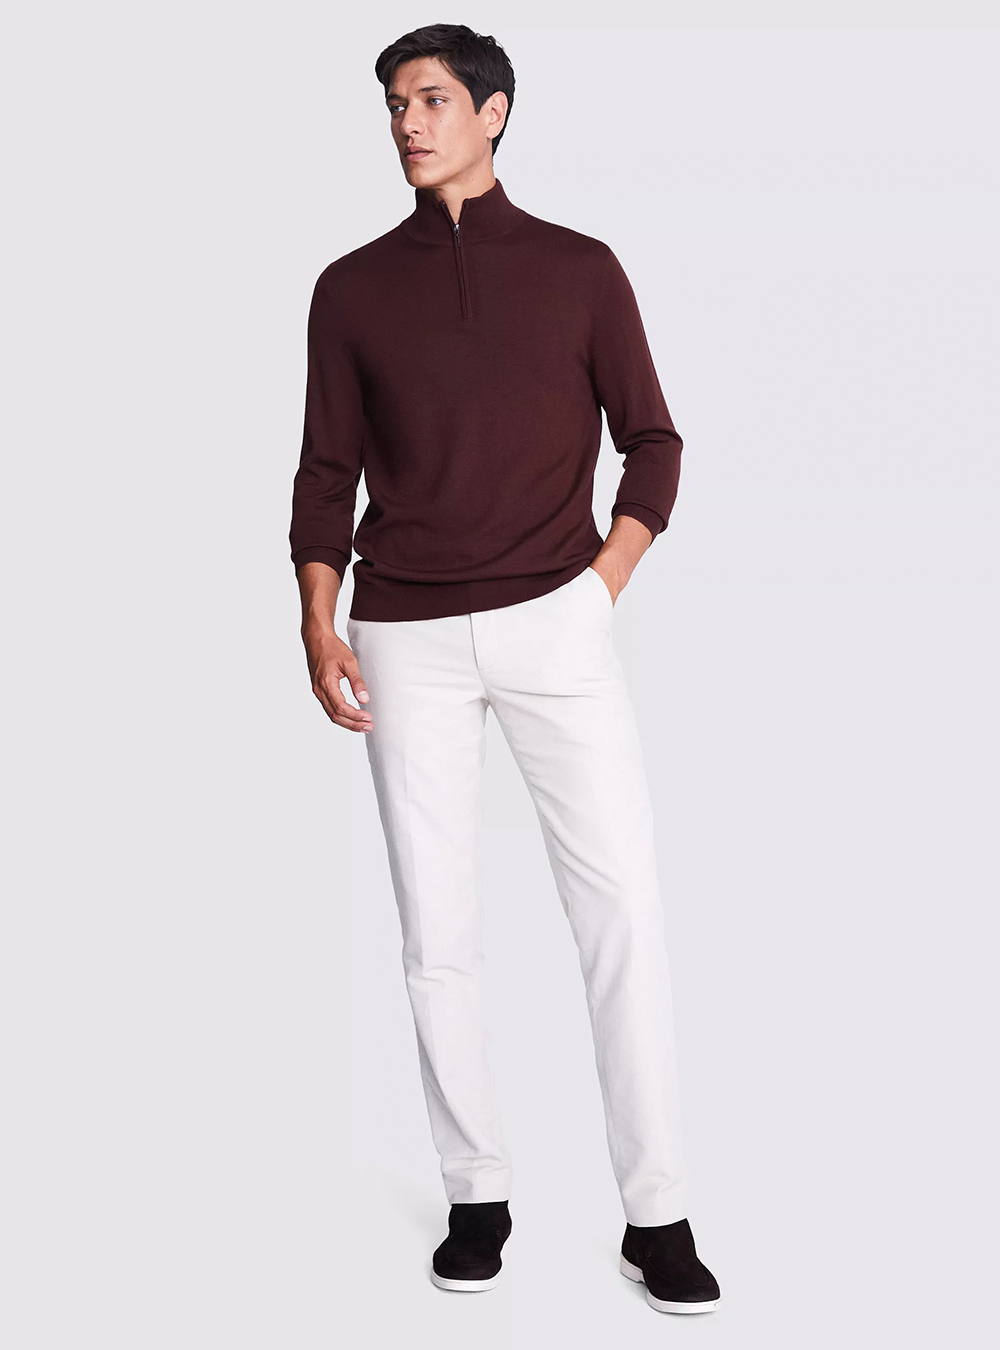 burgundy sweater, white chinos, and black suede loafers